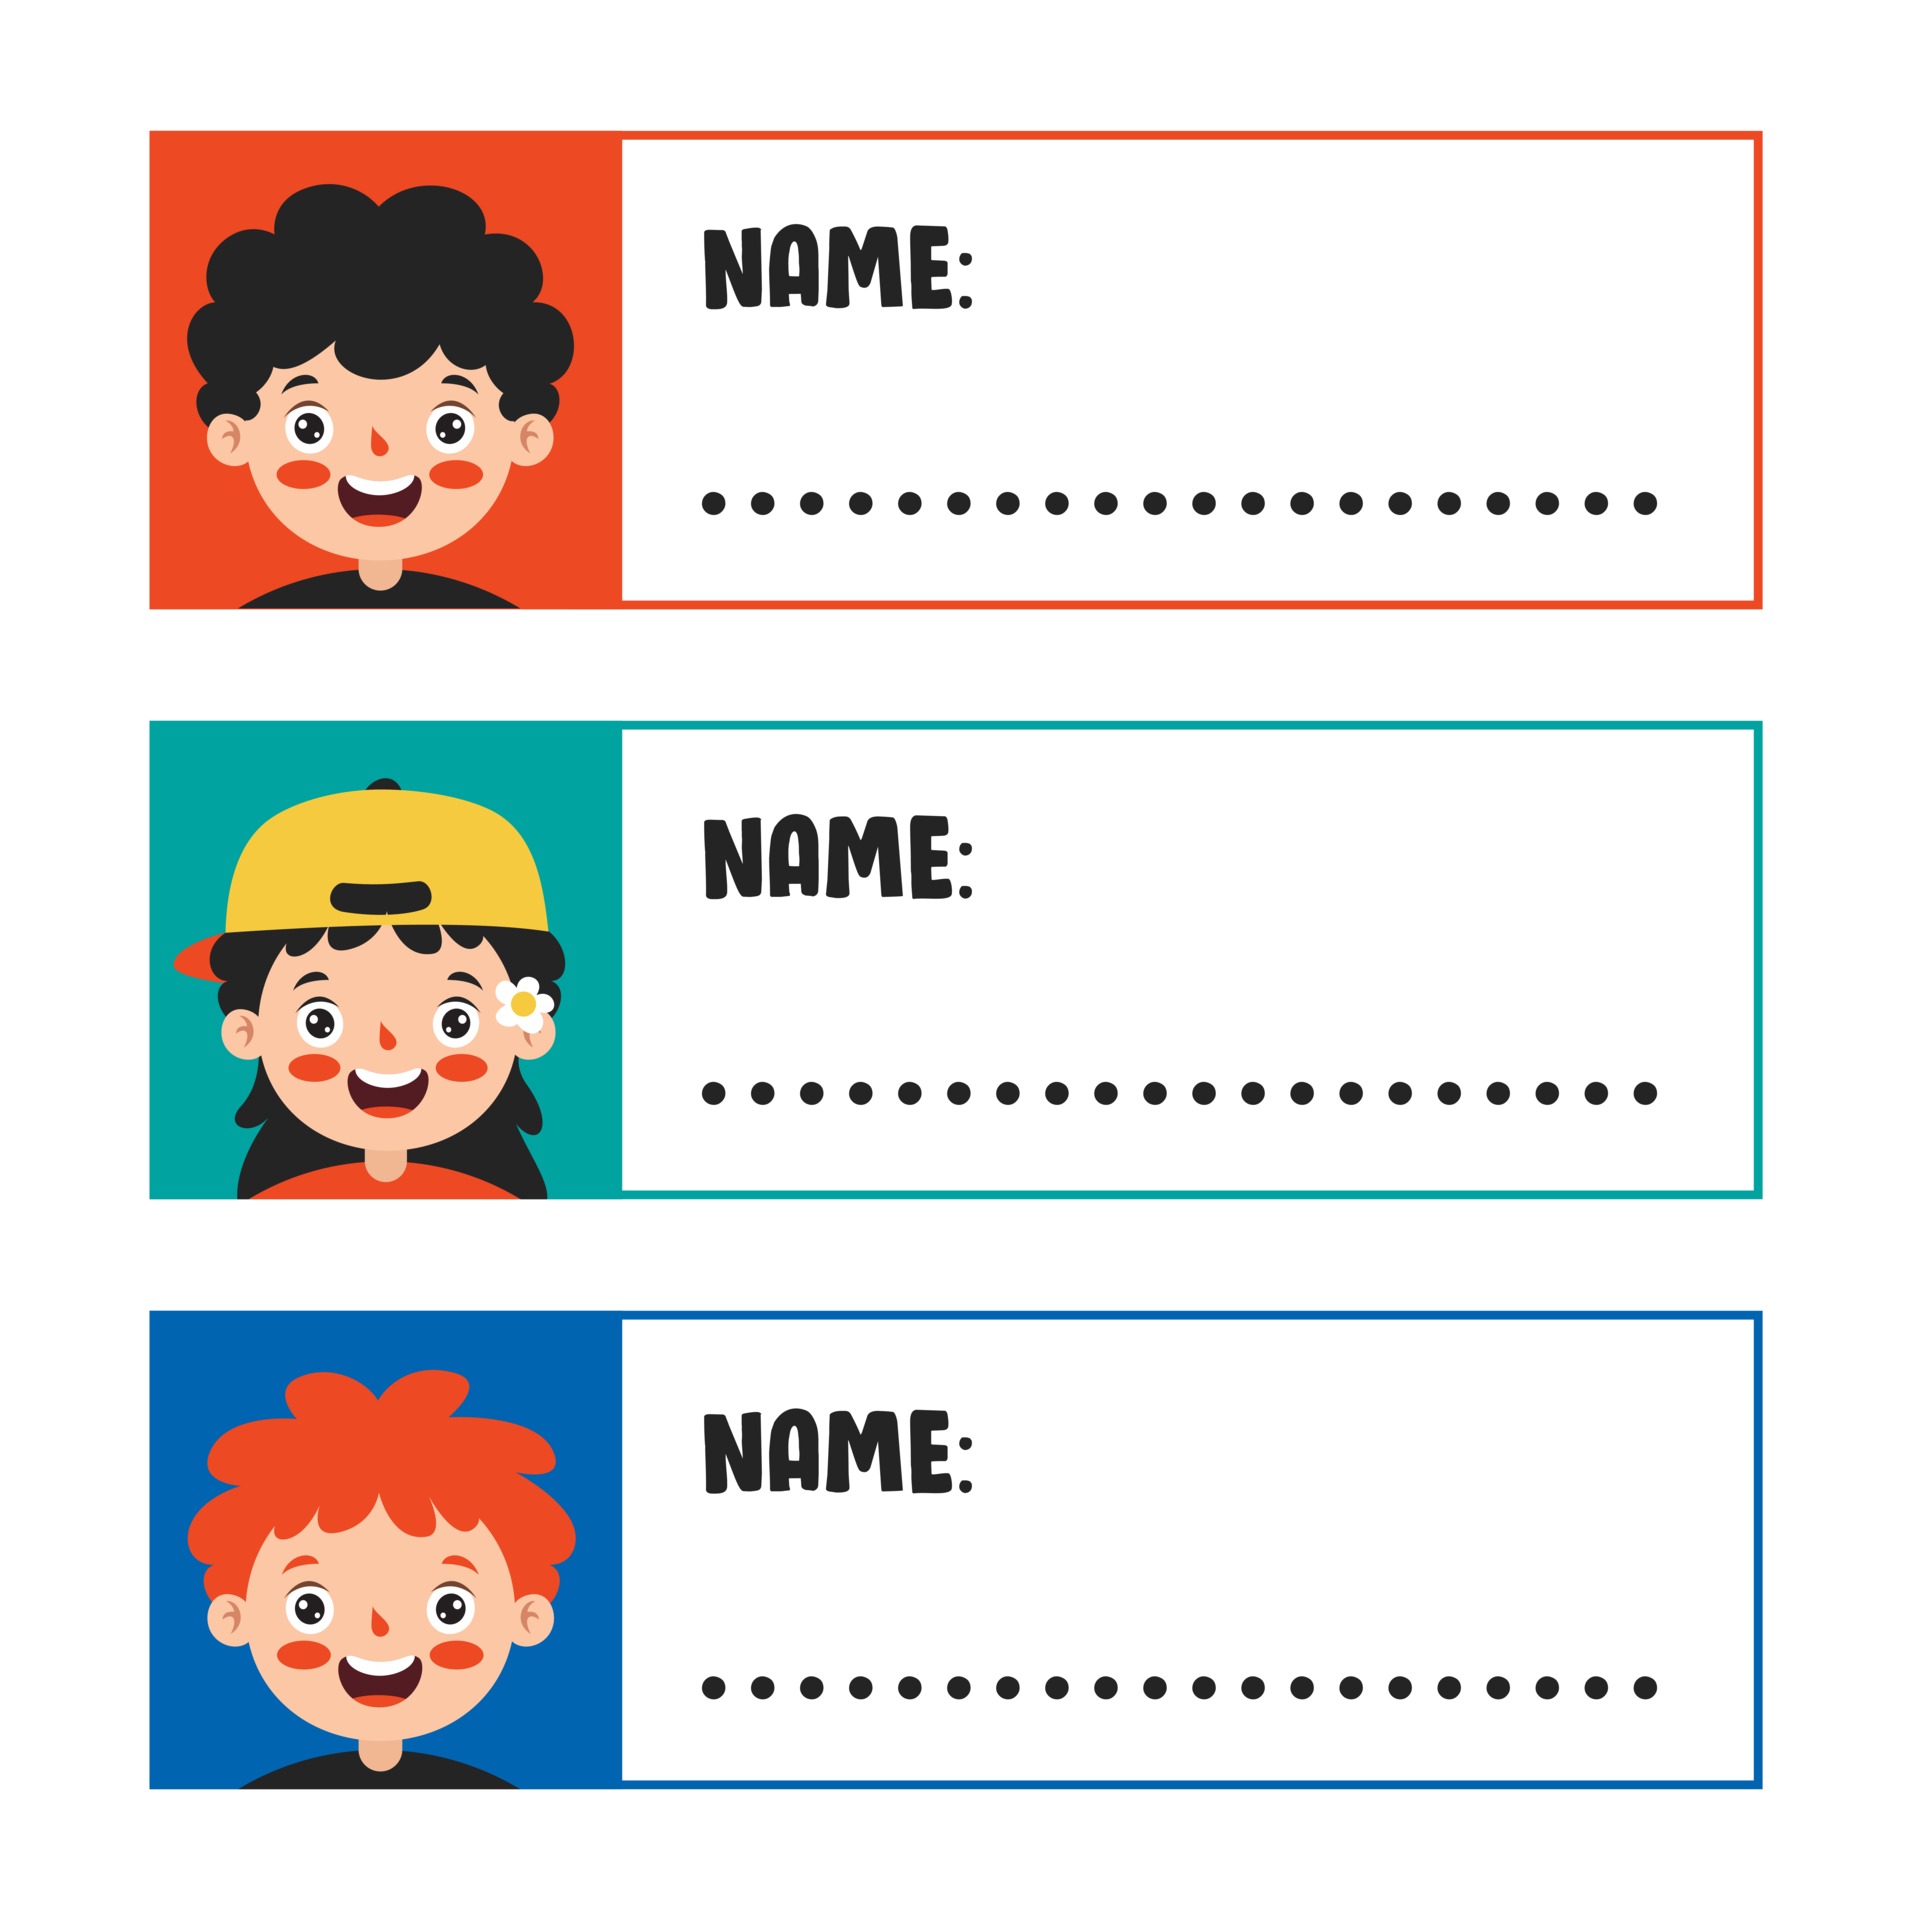 How To Make Name Tags For School Books